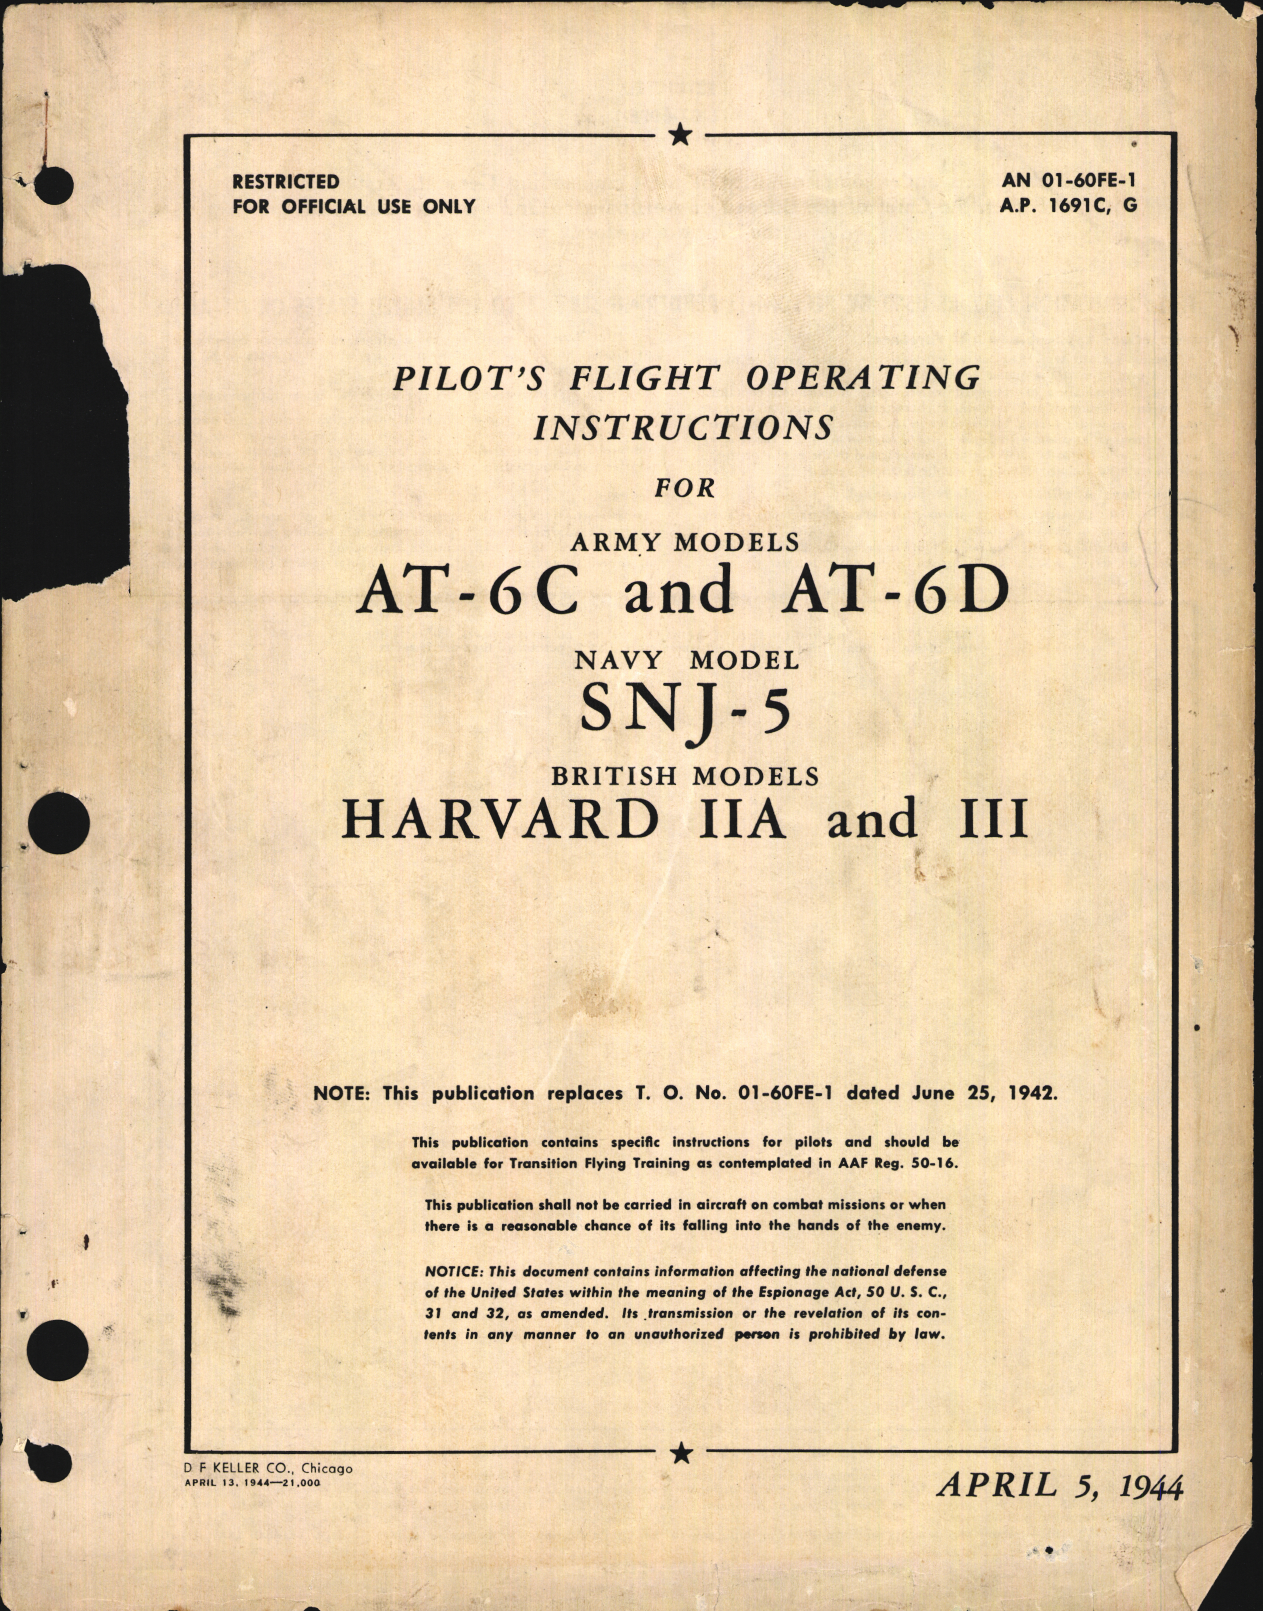 Sample page 1 from AirCorps Library document: Pilot's Flight Operating Instructions for AT-6C and AT-6D, SNJ-5 (Harvard IIA and III)